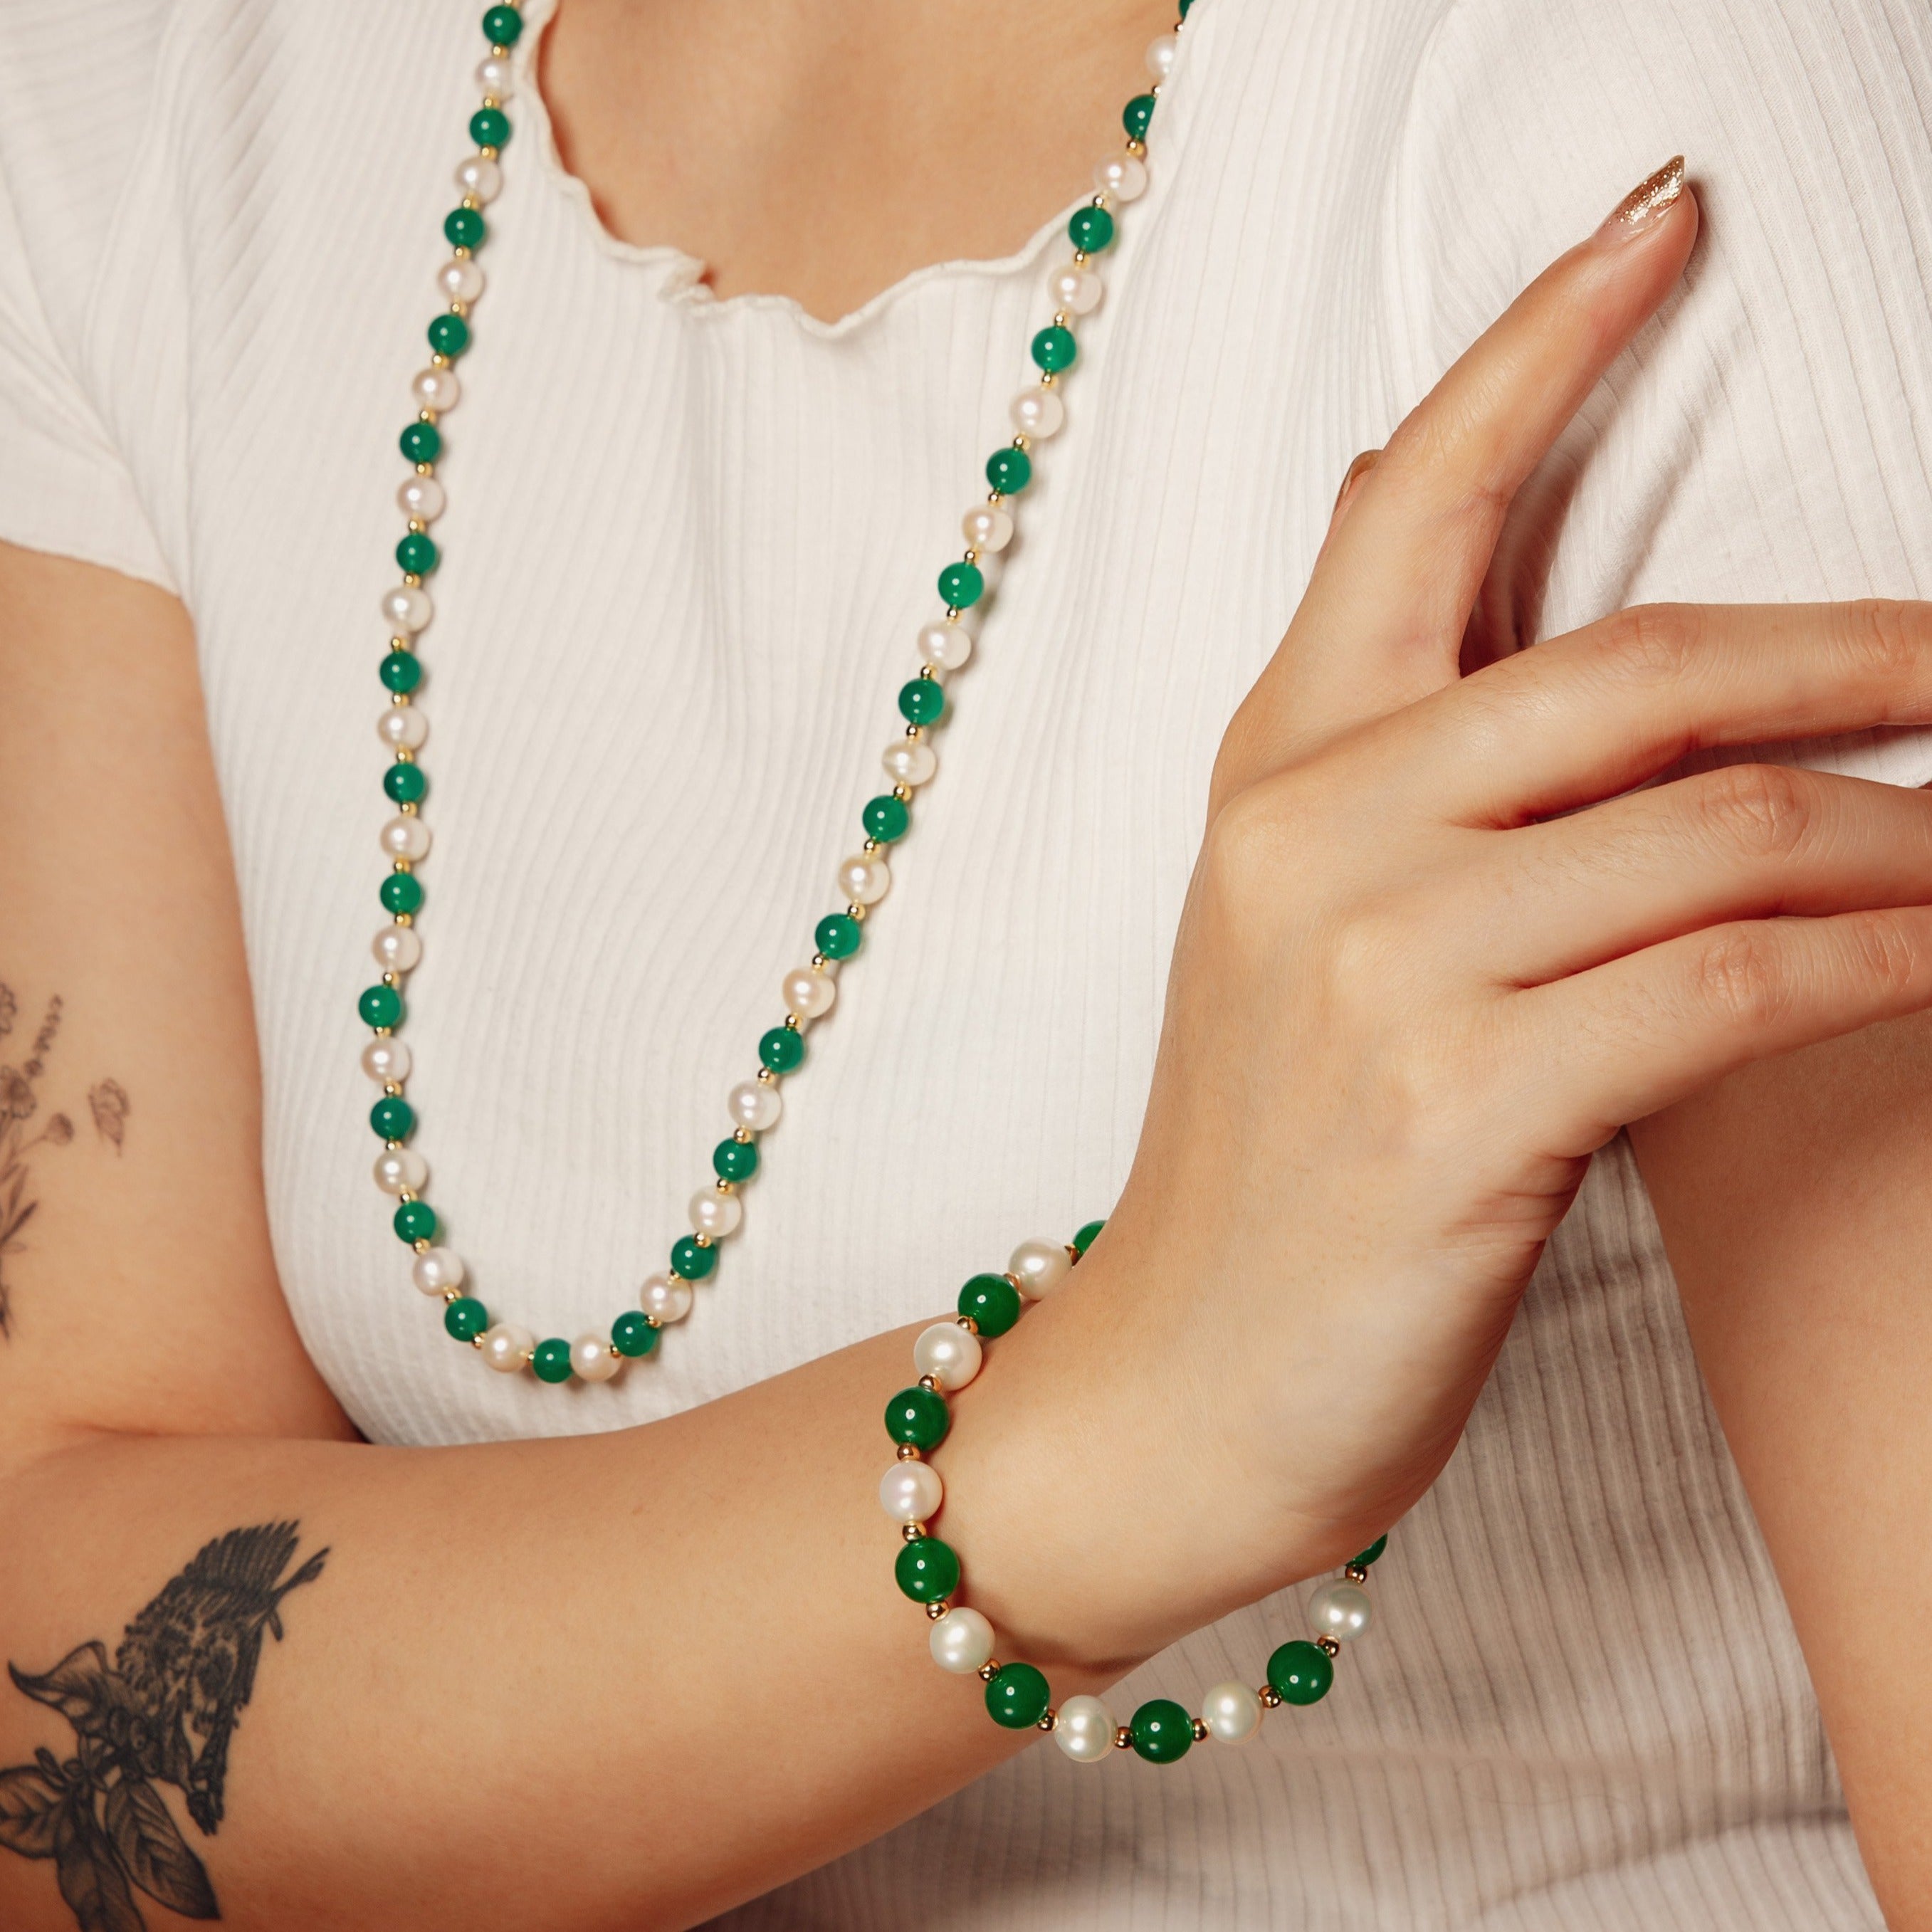 【Chalcedony】8MM S925 Pearl Jade Necklace